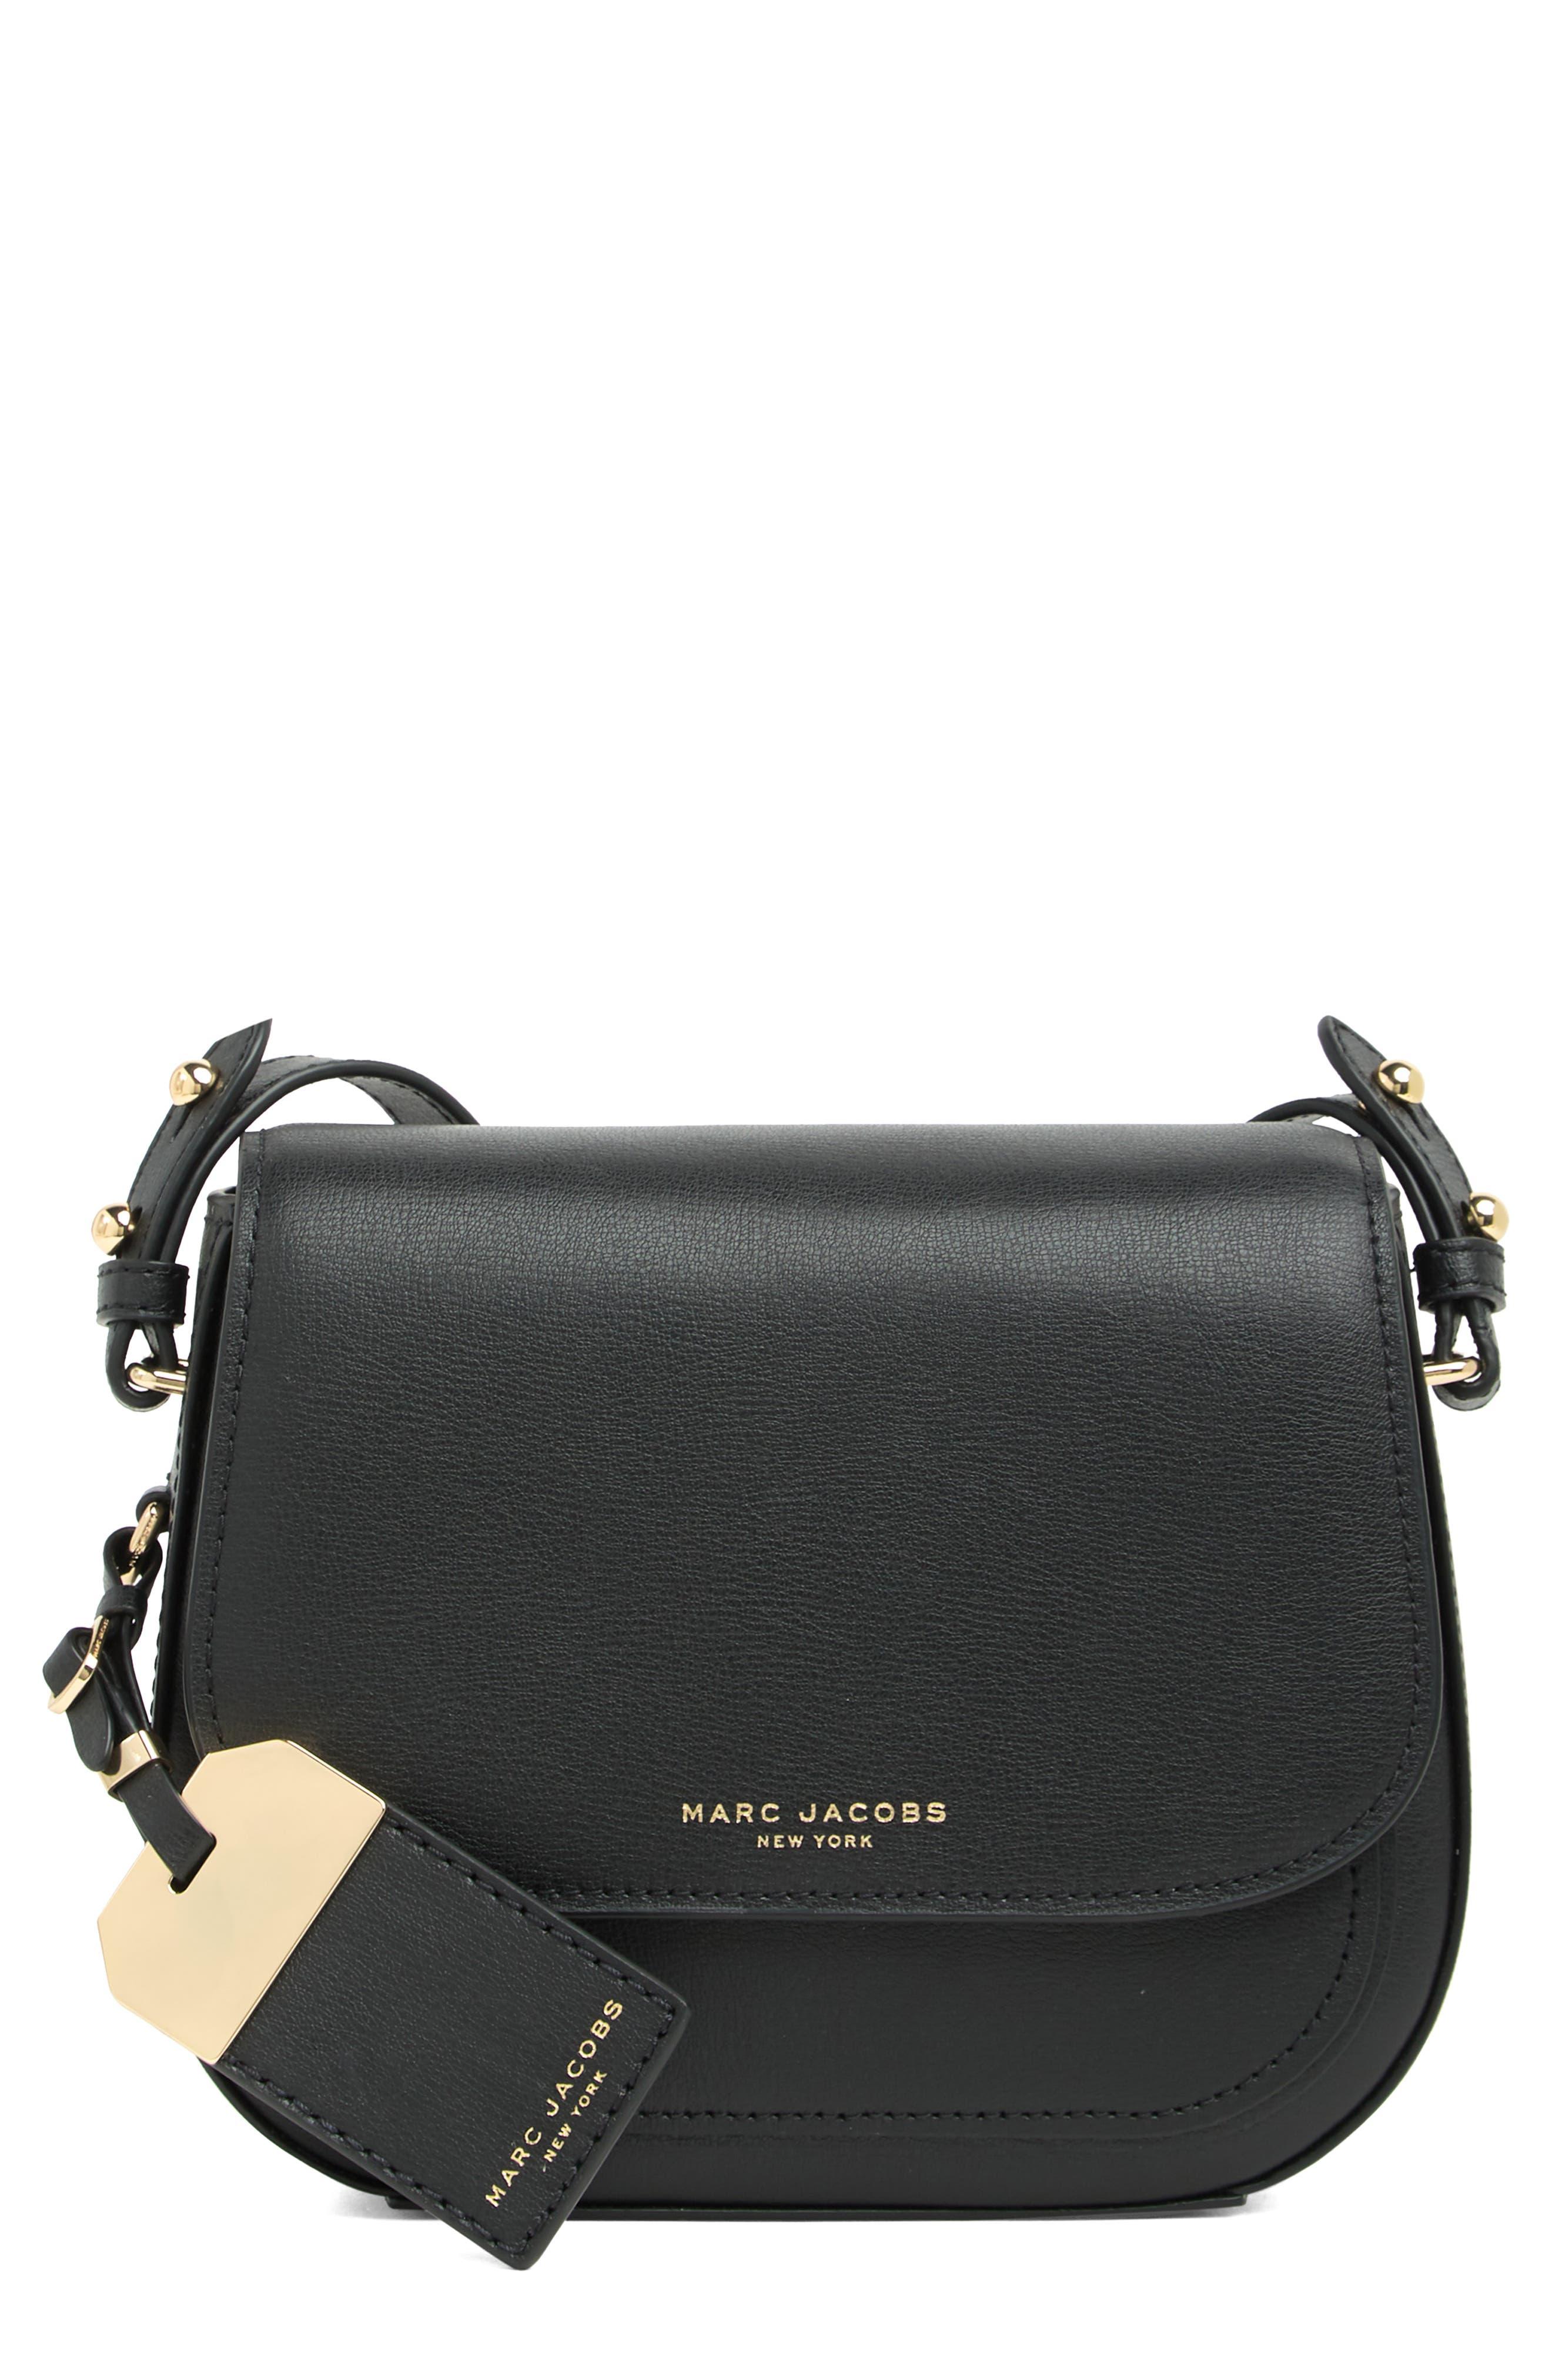 Marc Jacobs Mini Rider Leather Crossbody Bag in Black